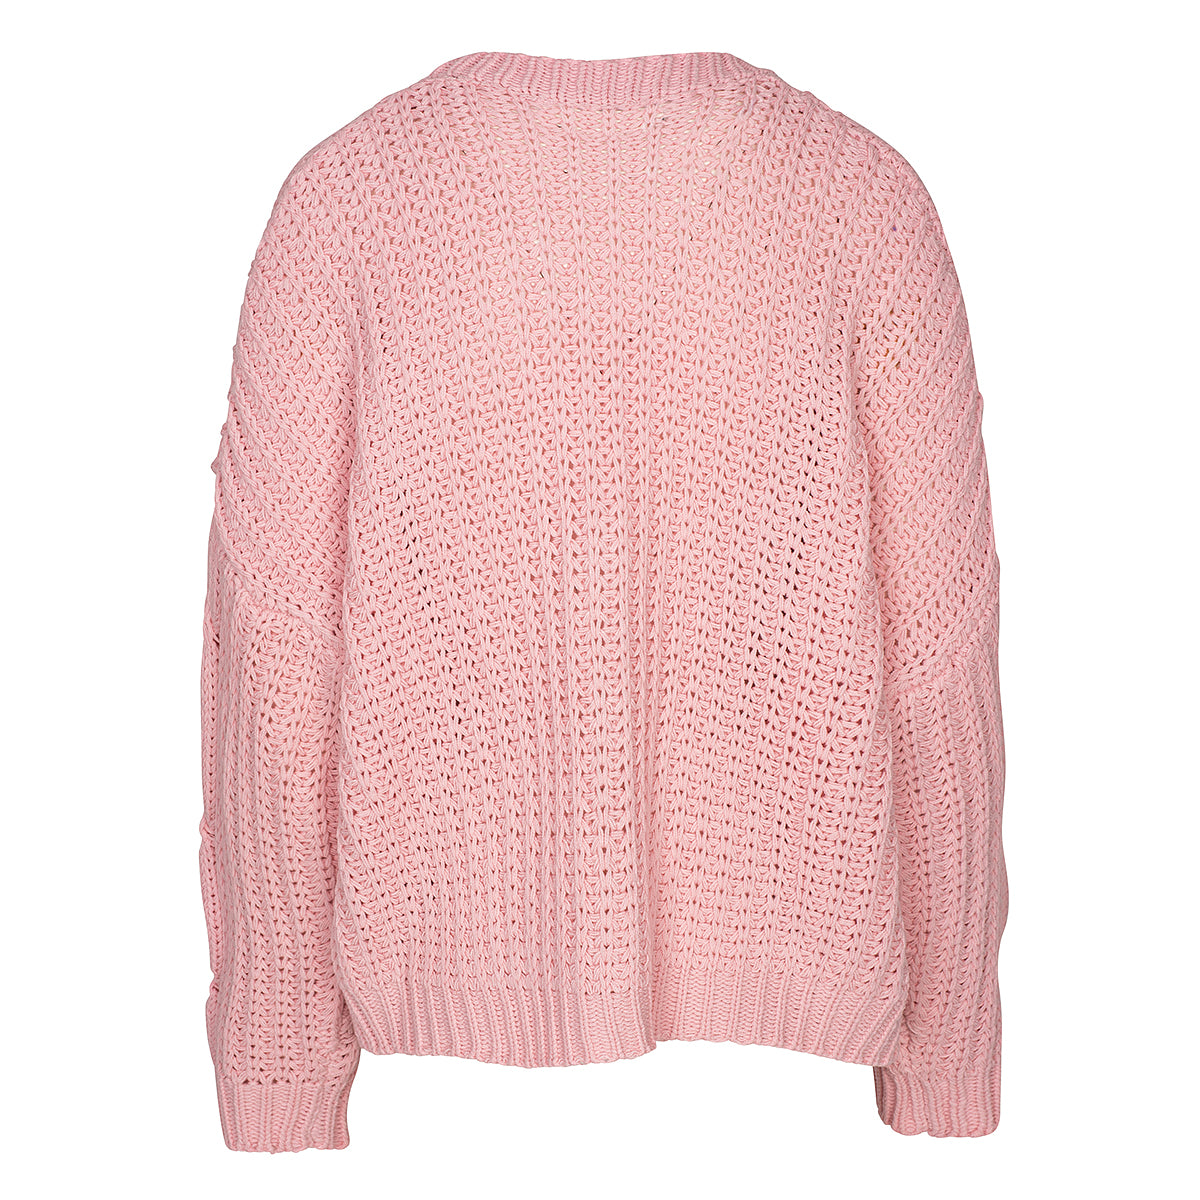 LUXZUZ // ONE TWO Signi Knit Knit 314 Rose Shadow